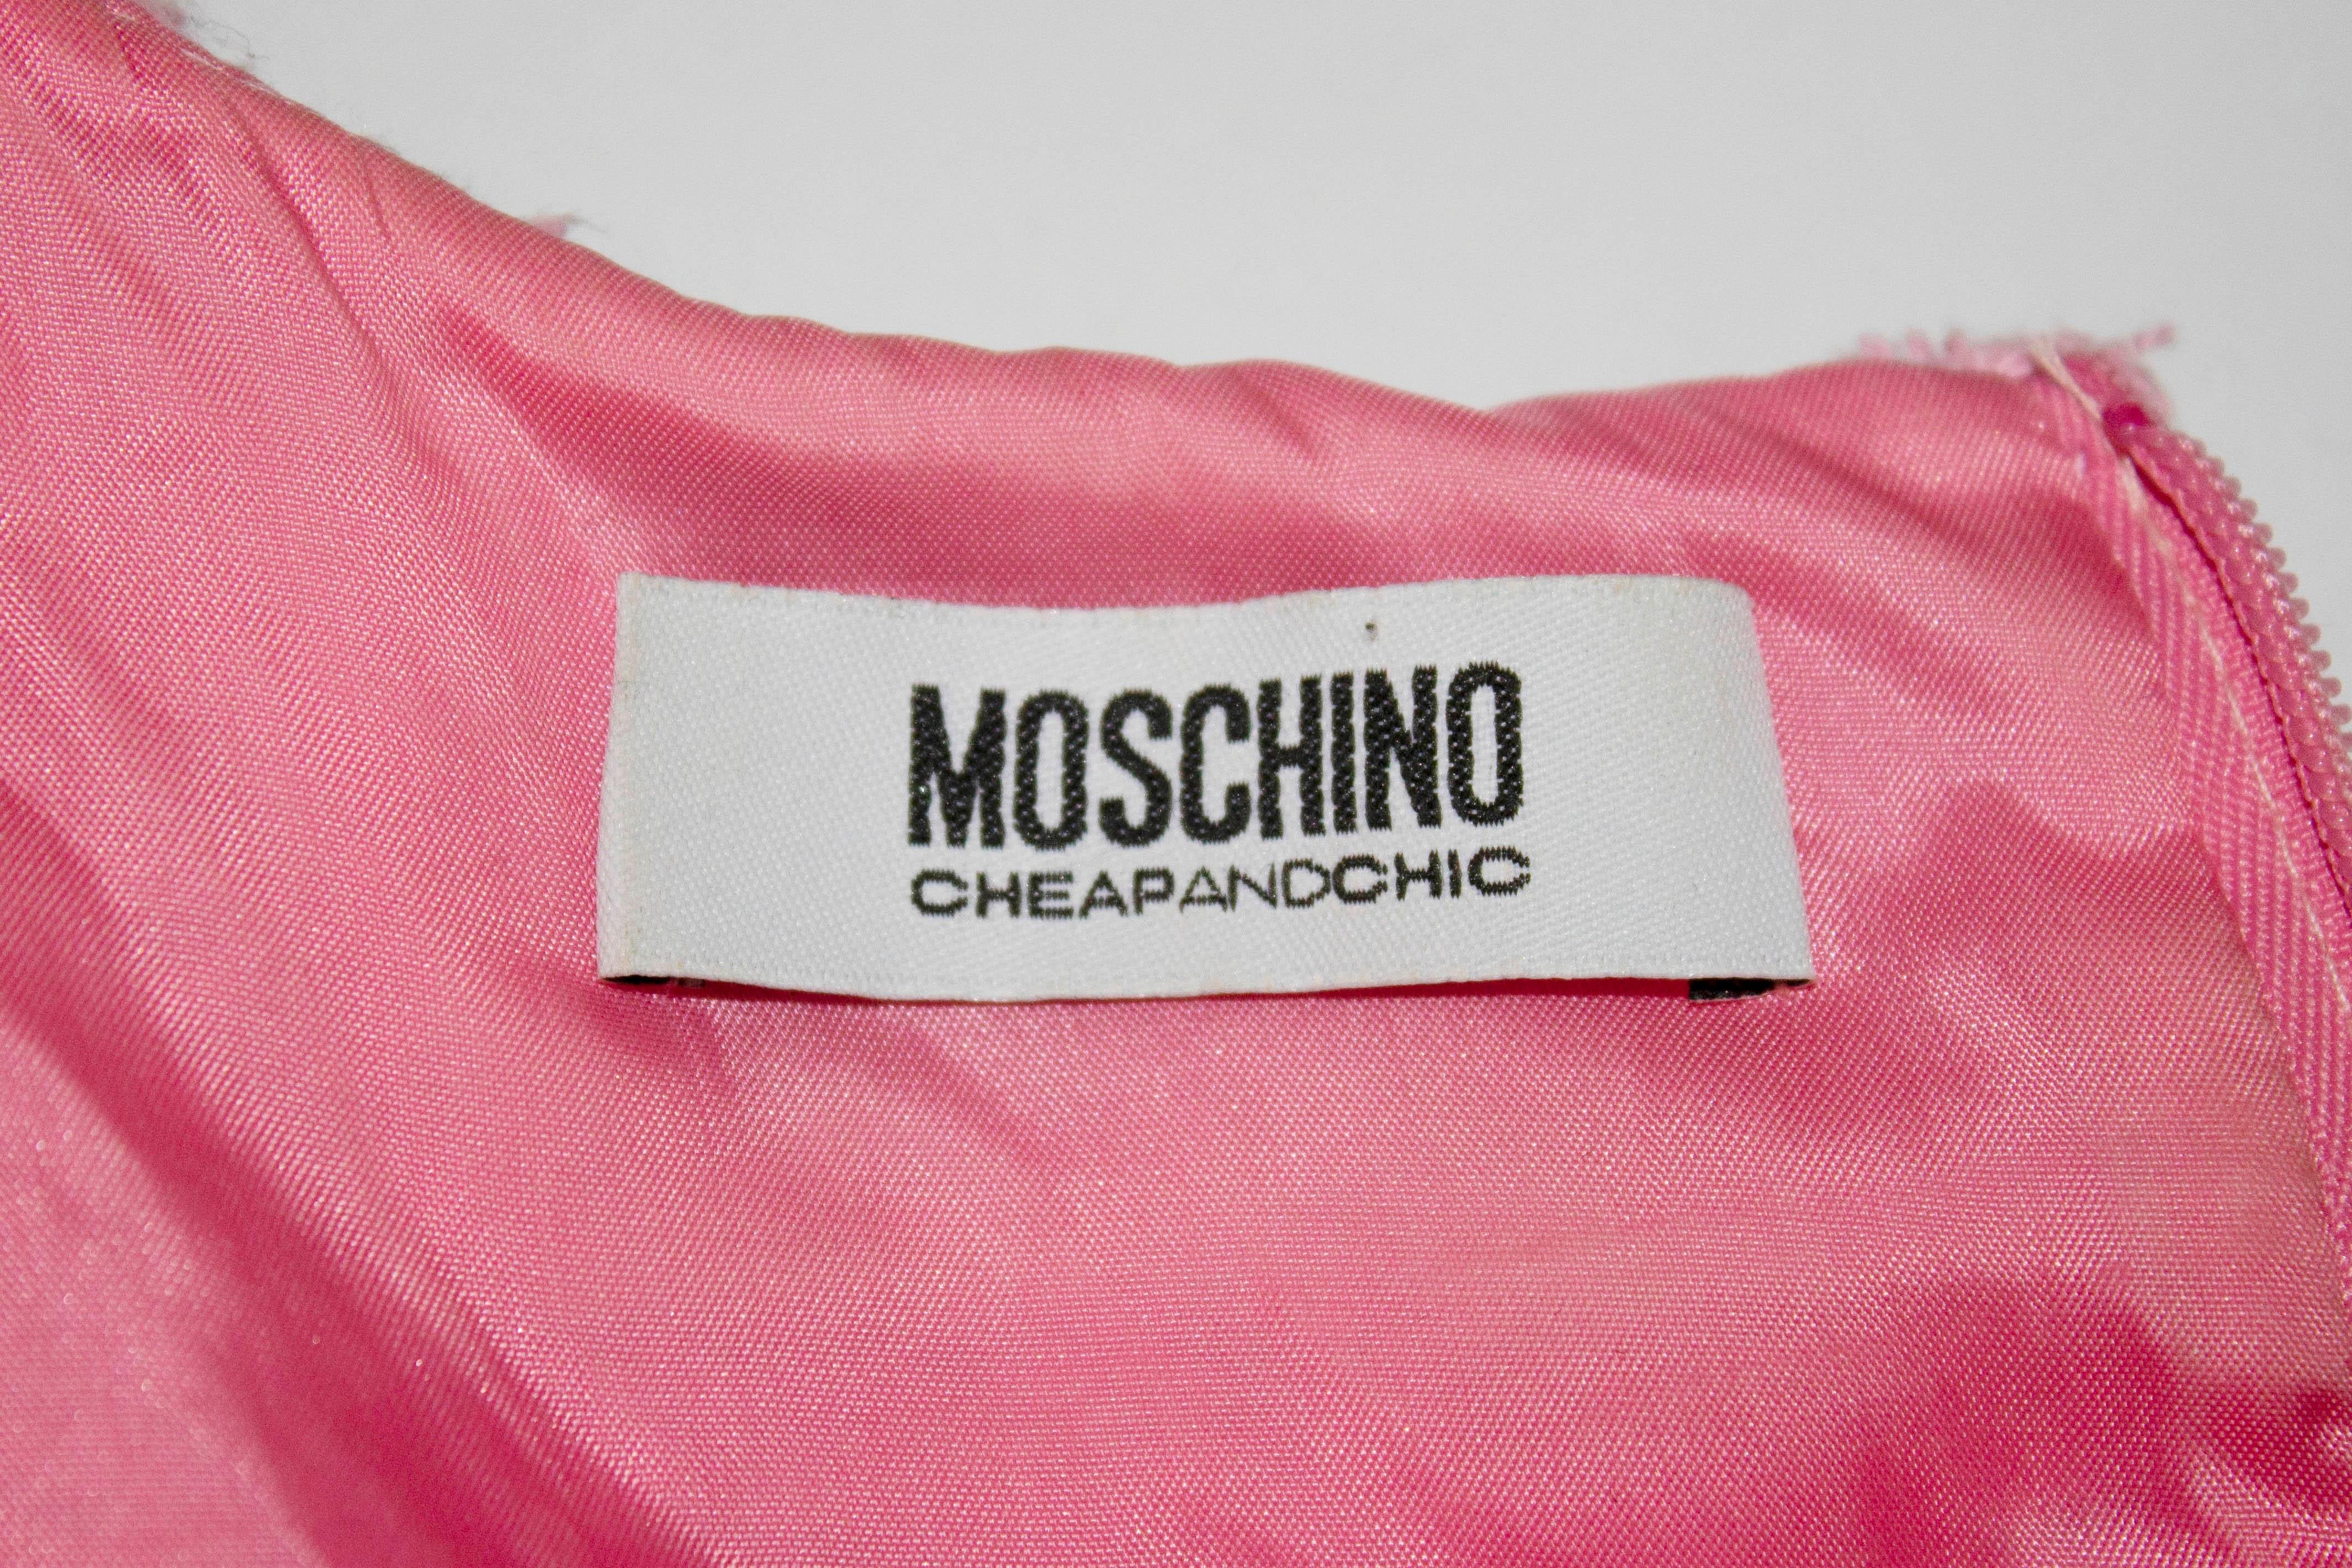 A pretty pink shift dress by Moschino , Cheap and Chic. In a pink cotton mix fabric the dress has animal print detail around the neckline , and central back zip and is fully lined.

Size GB 6 /  USA 4 , Bust 37'', length 34 '' plus 2'' hem.
